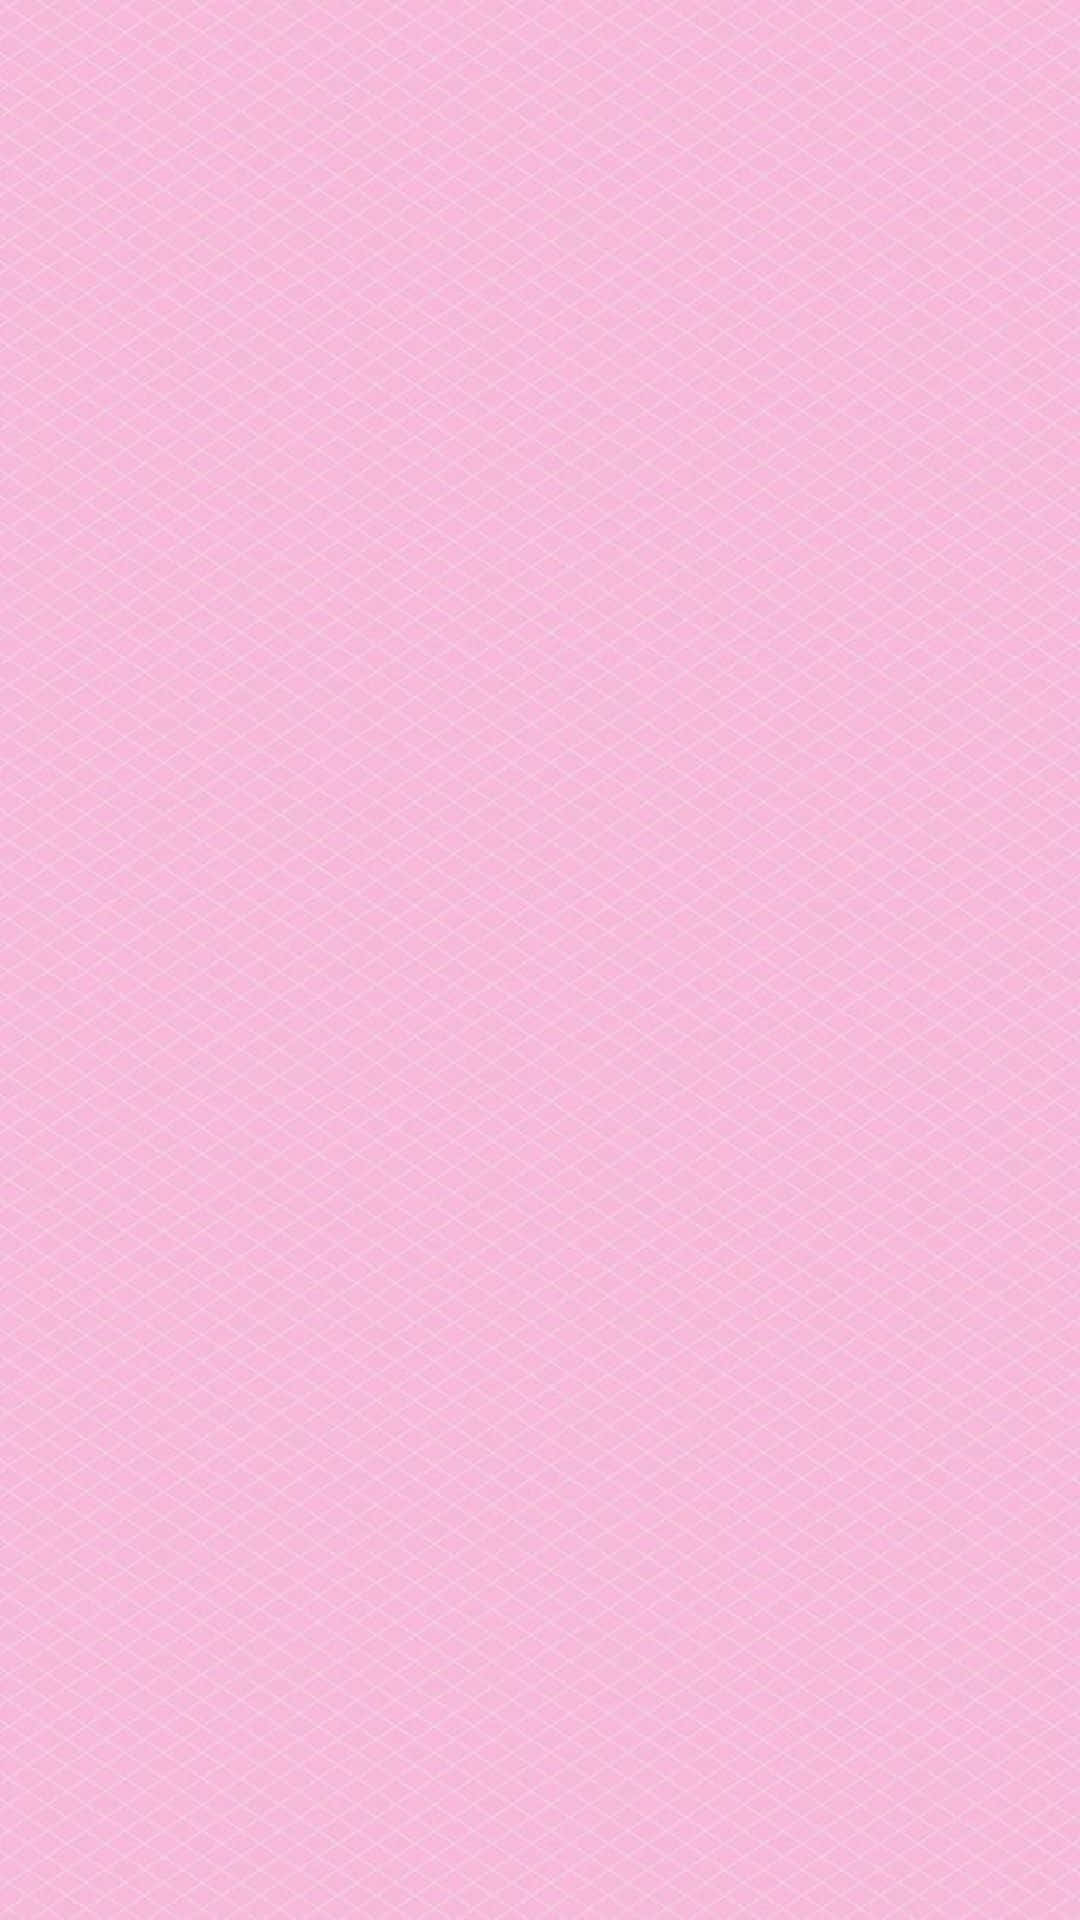 A Pink Background With A Small Square Pattern Wallpaper